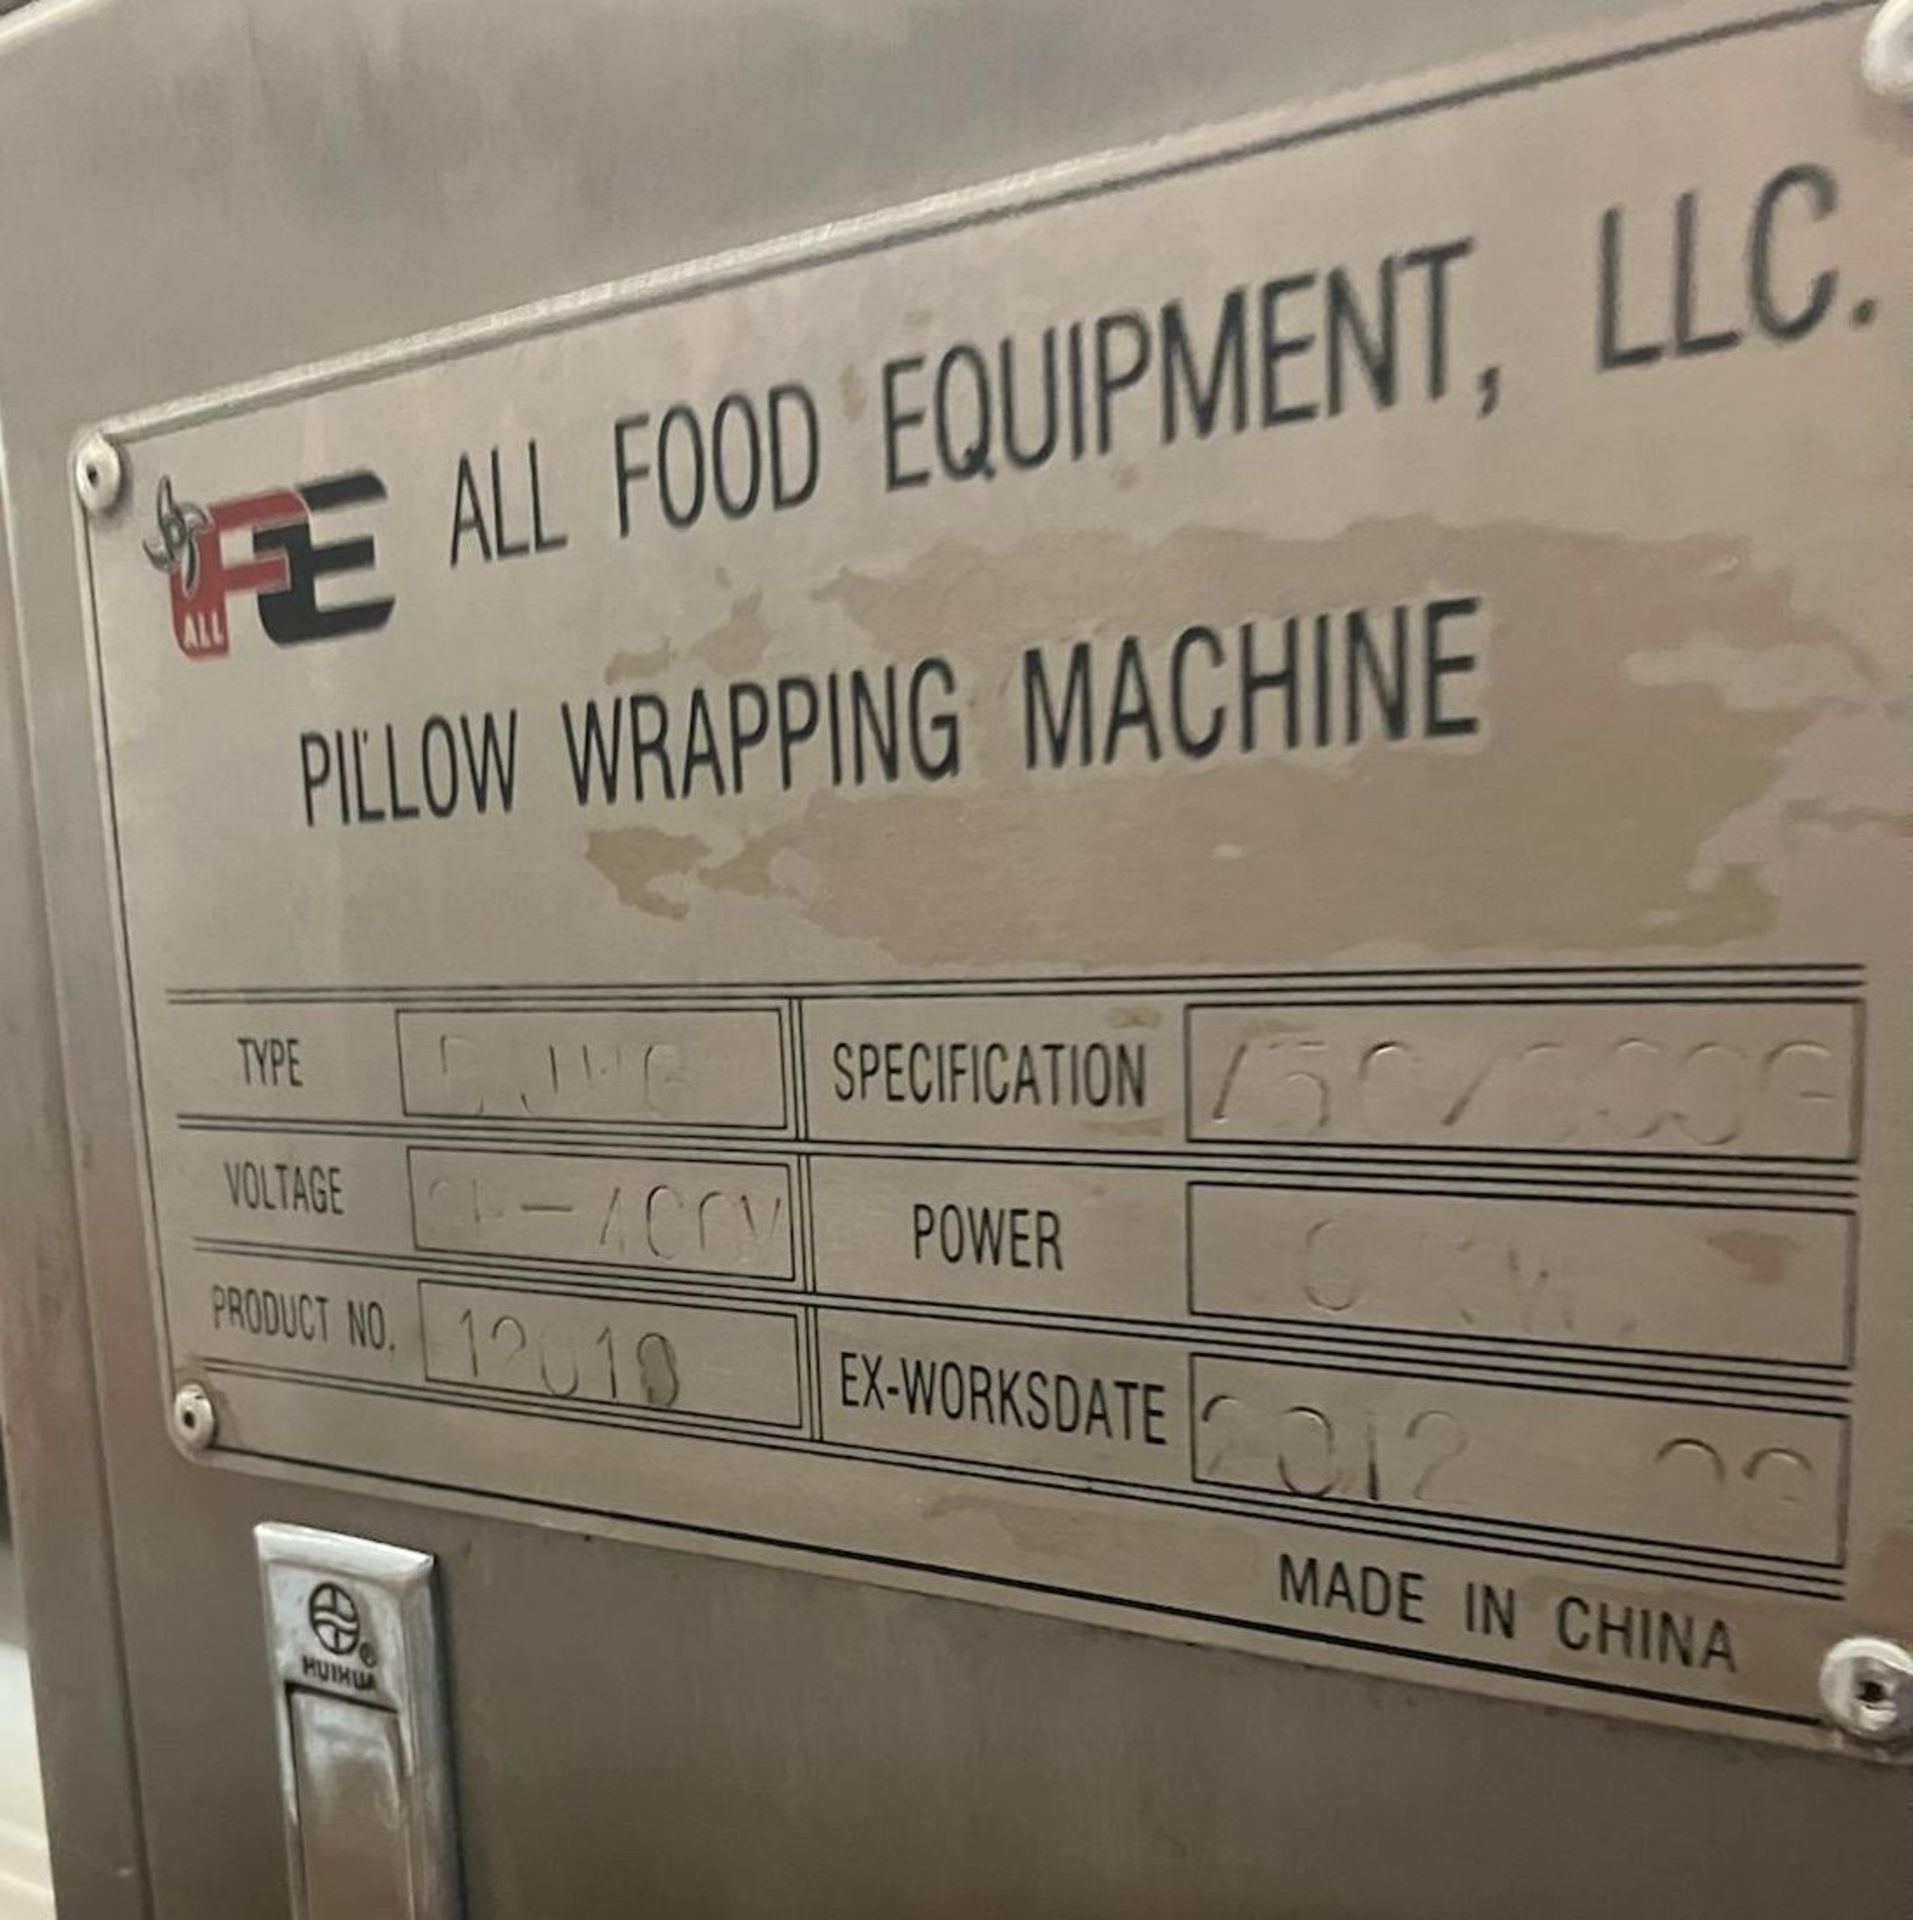 All Food Equipment (AFE) Pillow Wrapping Machine / Tray Wrapper, 480 VAC / 3 Phase | Rig Fee $100 - Bild 6 aus 7